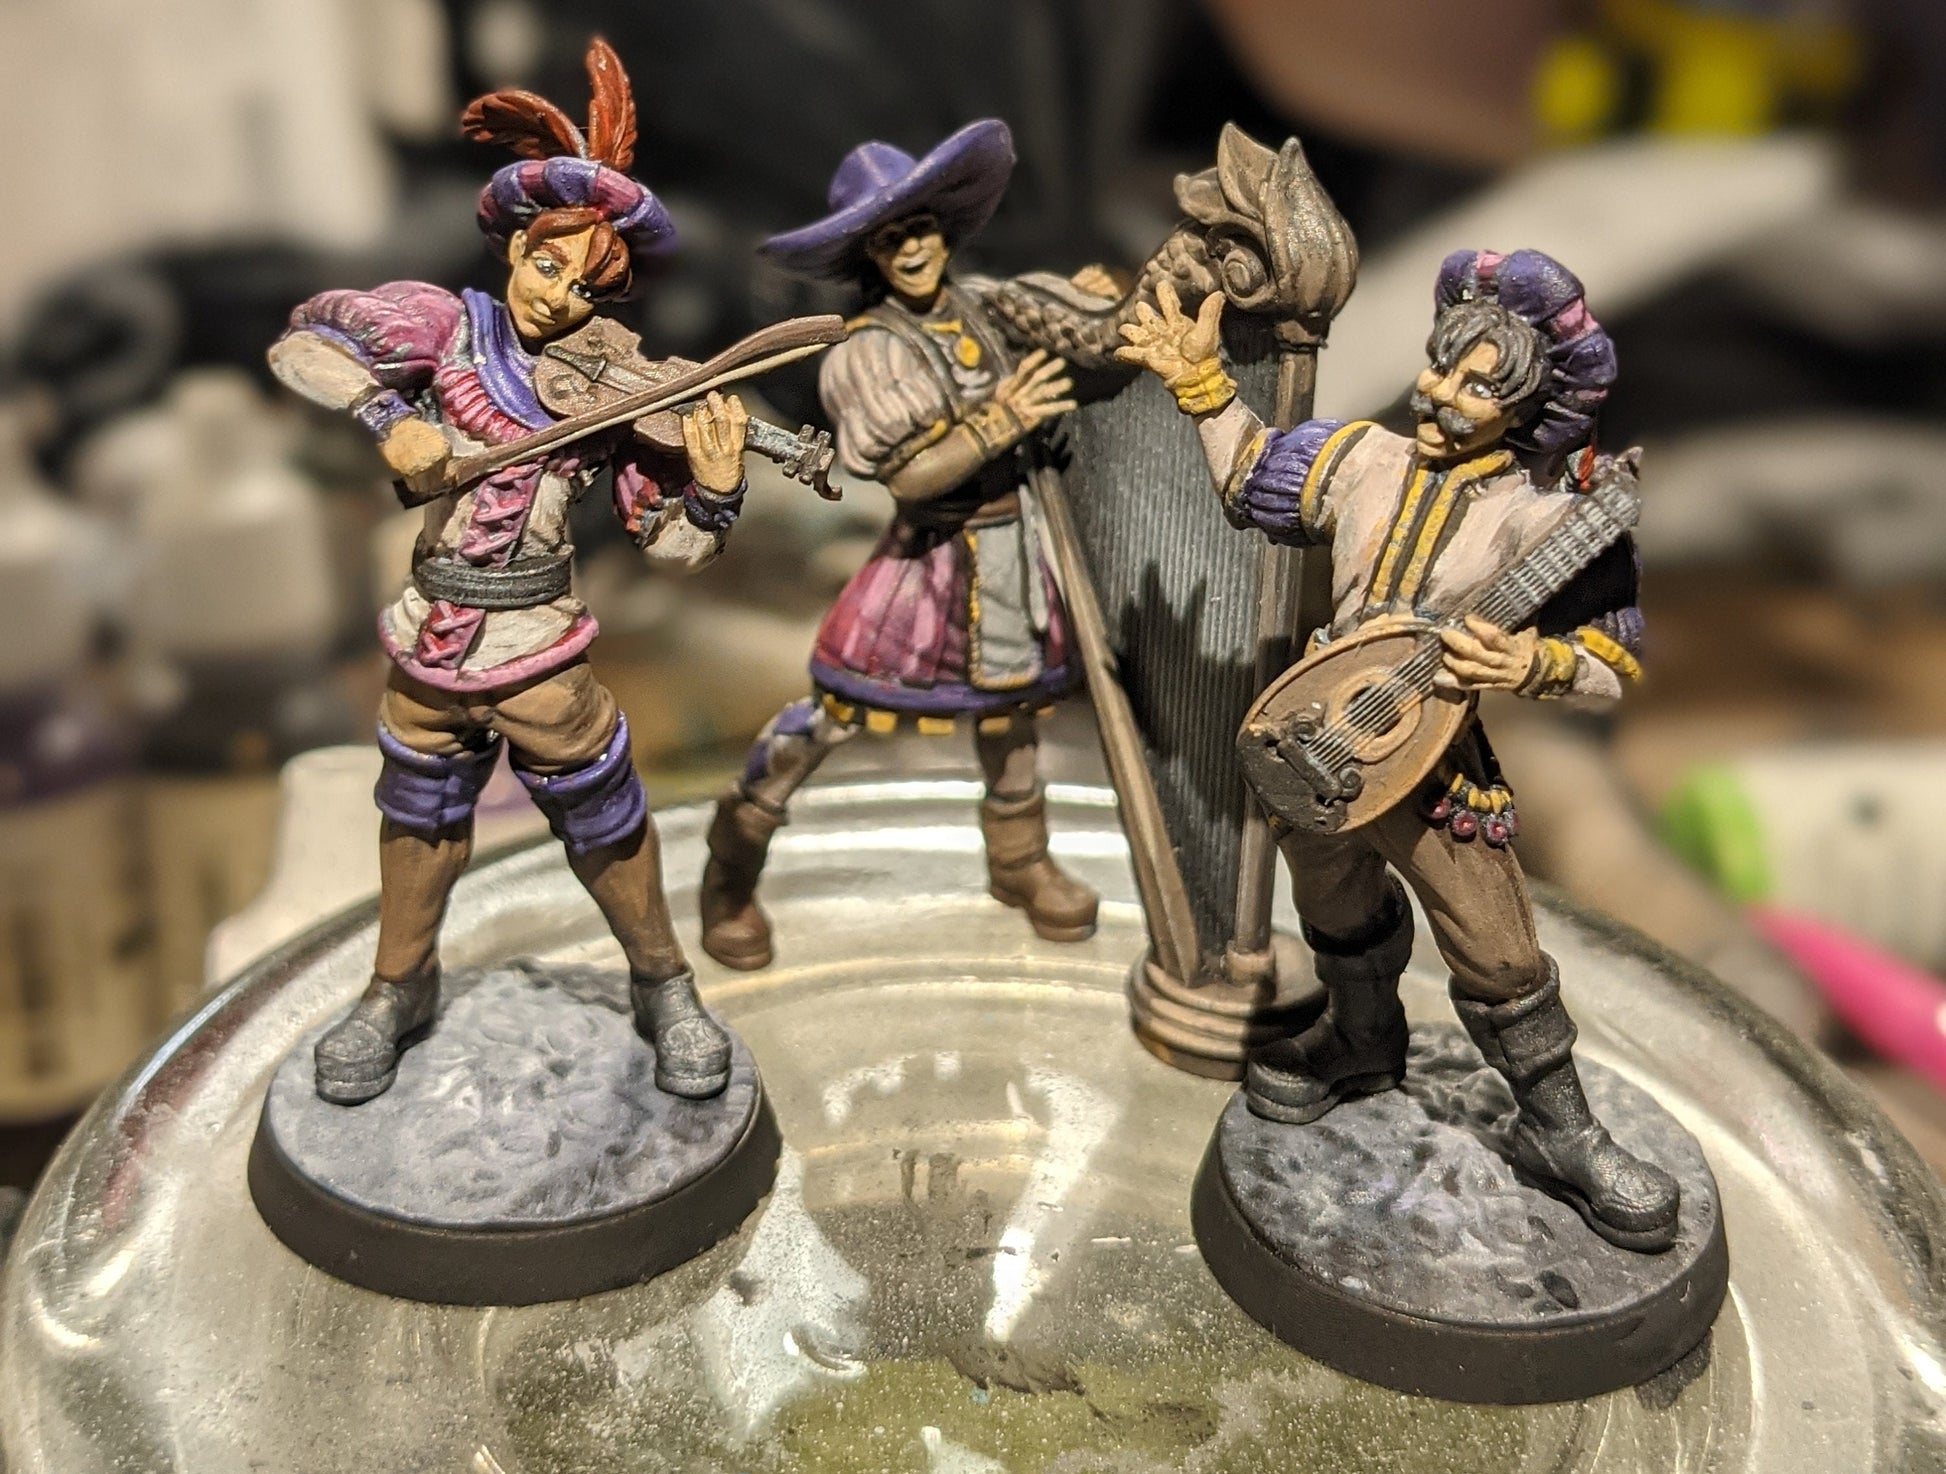 Musicians Townsfolk Painted Models - 3 Cast n Play Printed Miniatures | Dungeons & Dragons | Pathfinder | Tabletop